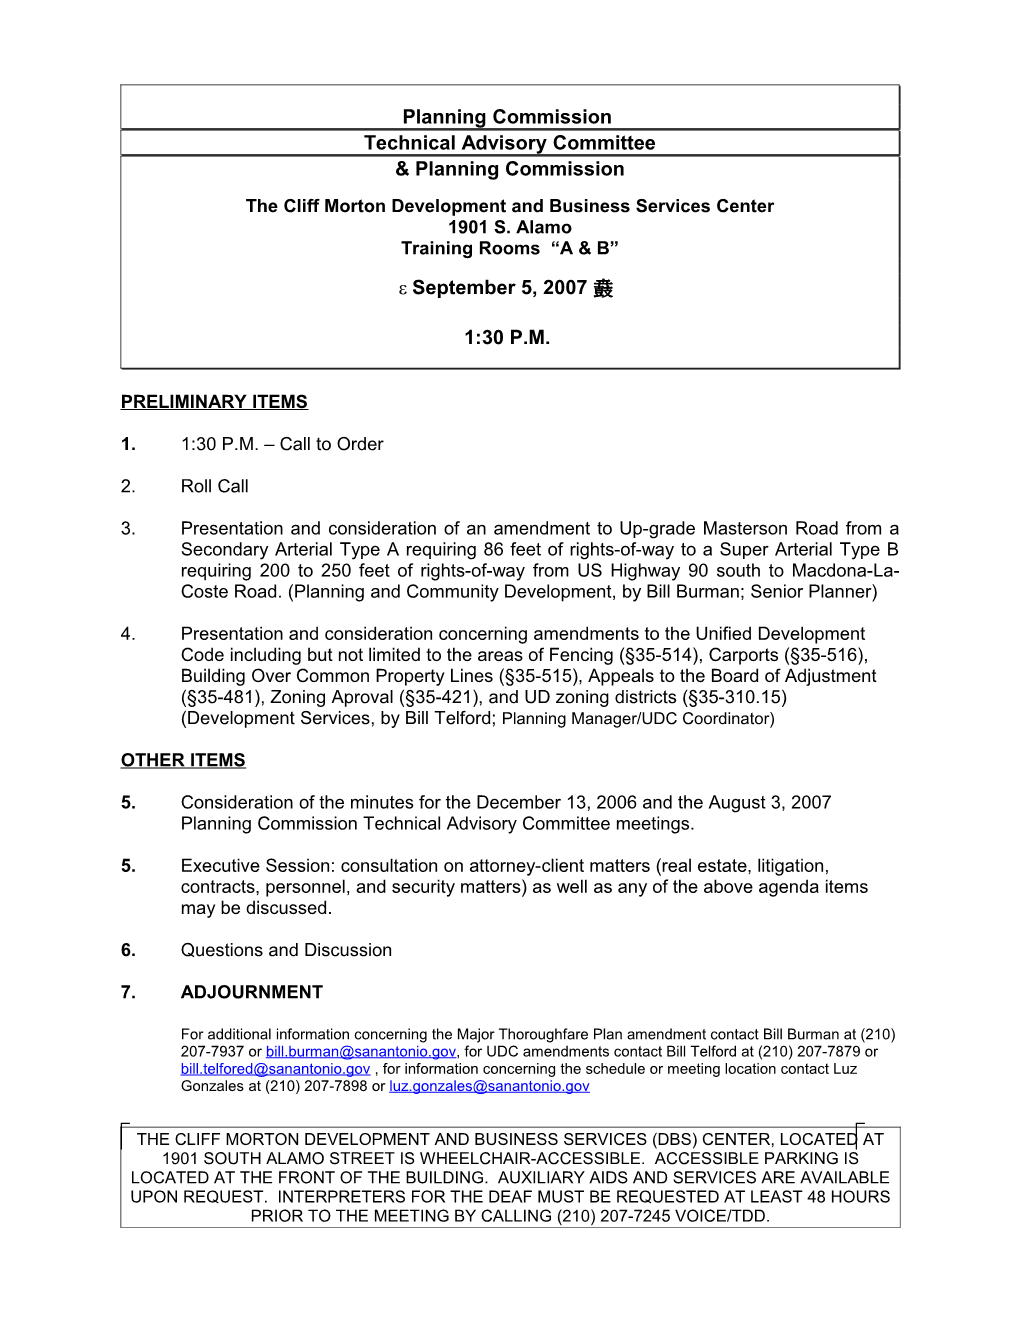 Planning Commission Technical Advisory Committee